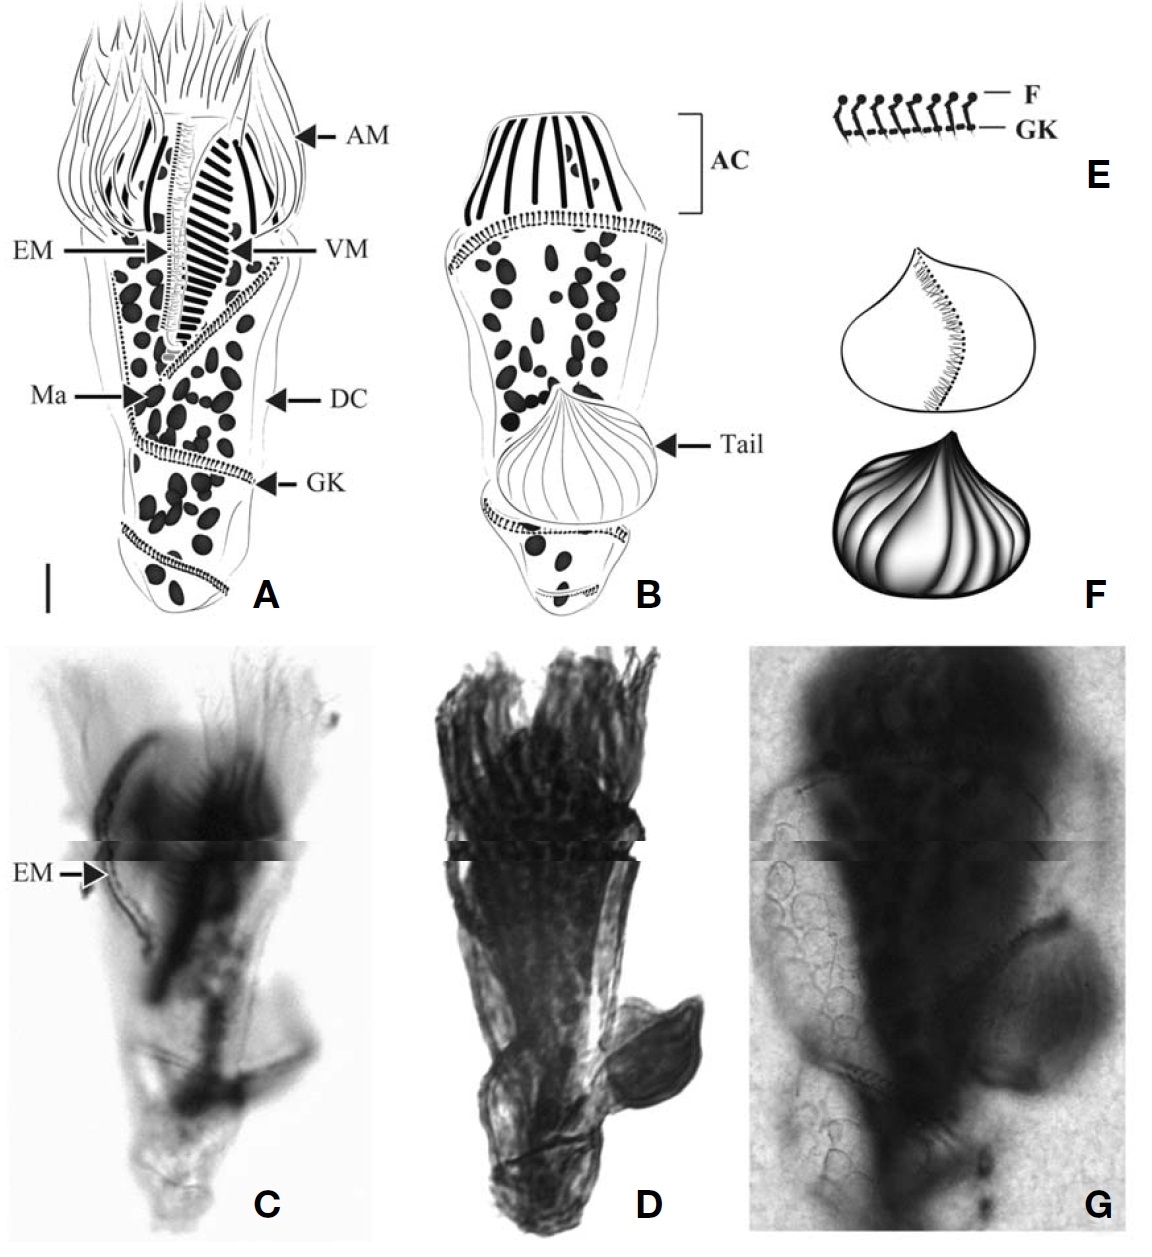 Spirotontonia grandis after protargol impregnation. A C Ventral view; B Dorsal view; D Left view (B and D show that tailis located on the second whorl GK); E Detail of GK arrangement with F (probably fibers); F Detail of tail appearance top is the frontview and bottom is the back view with wrinkled surface; G Plated-form on surface of DC. AC apical collar; F probably fibers; DCdistended cell surface. Scale bar: 10 μm.